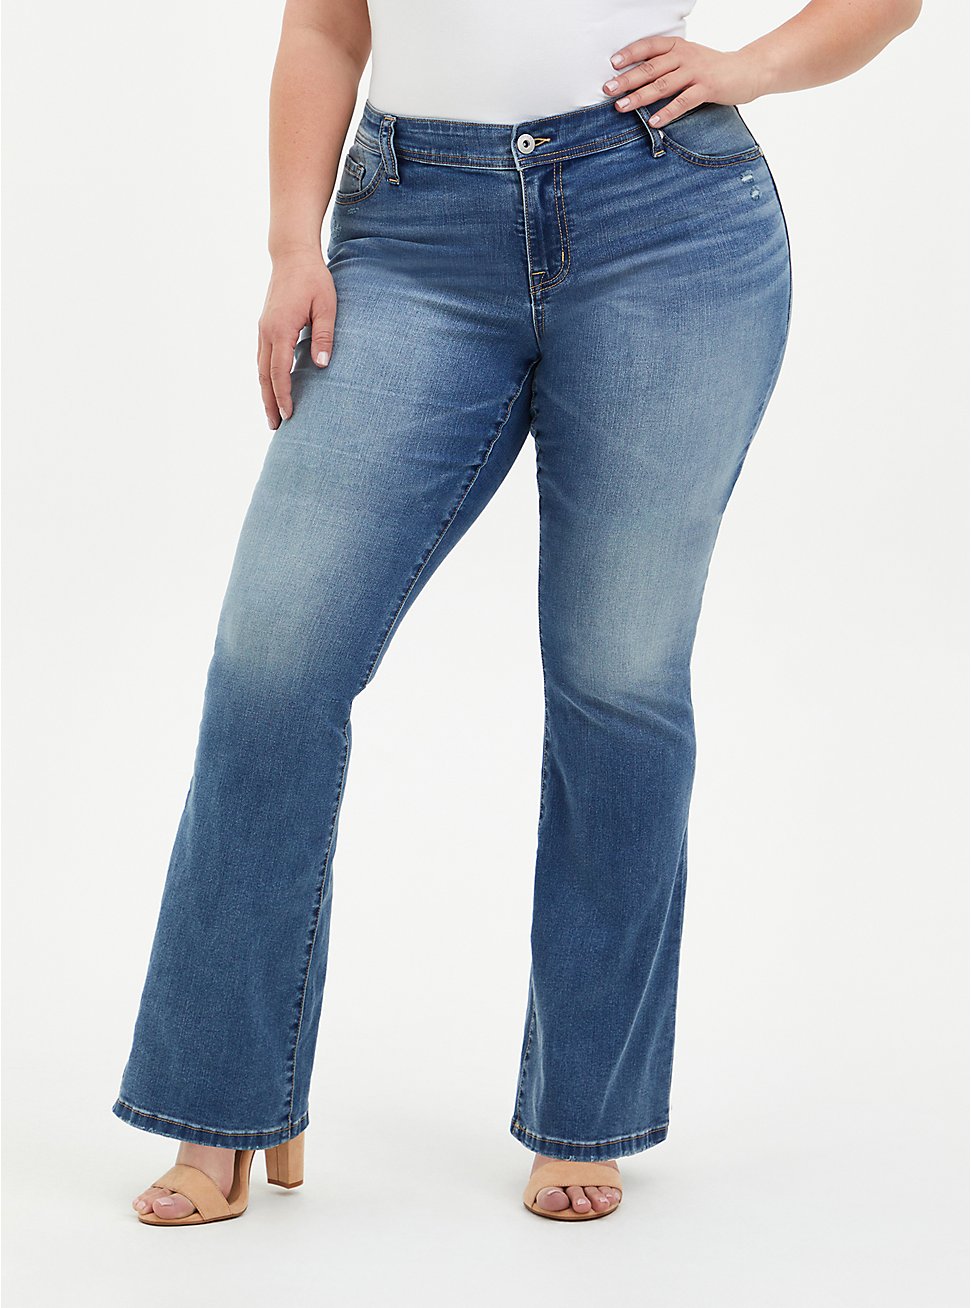 Luxe Slim Boot Jean - Super Stretch Light Wash, TYPHOON, hi-res